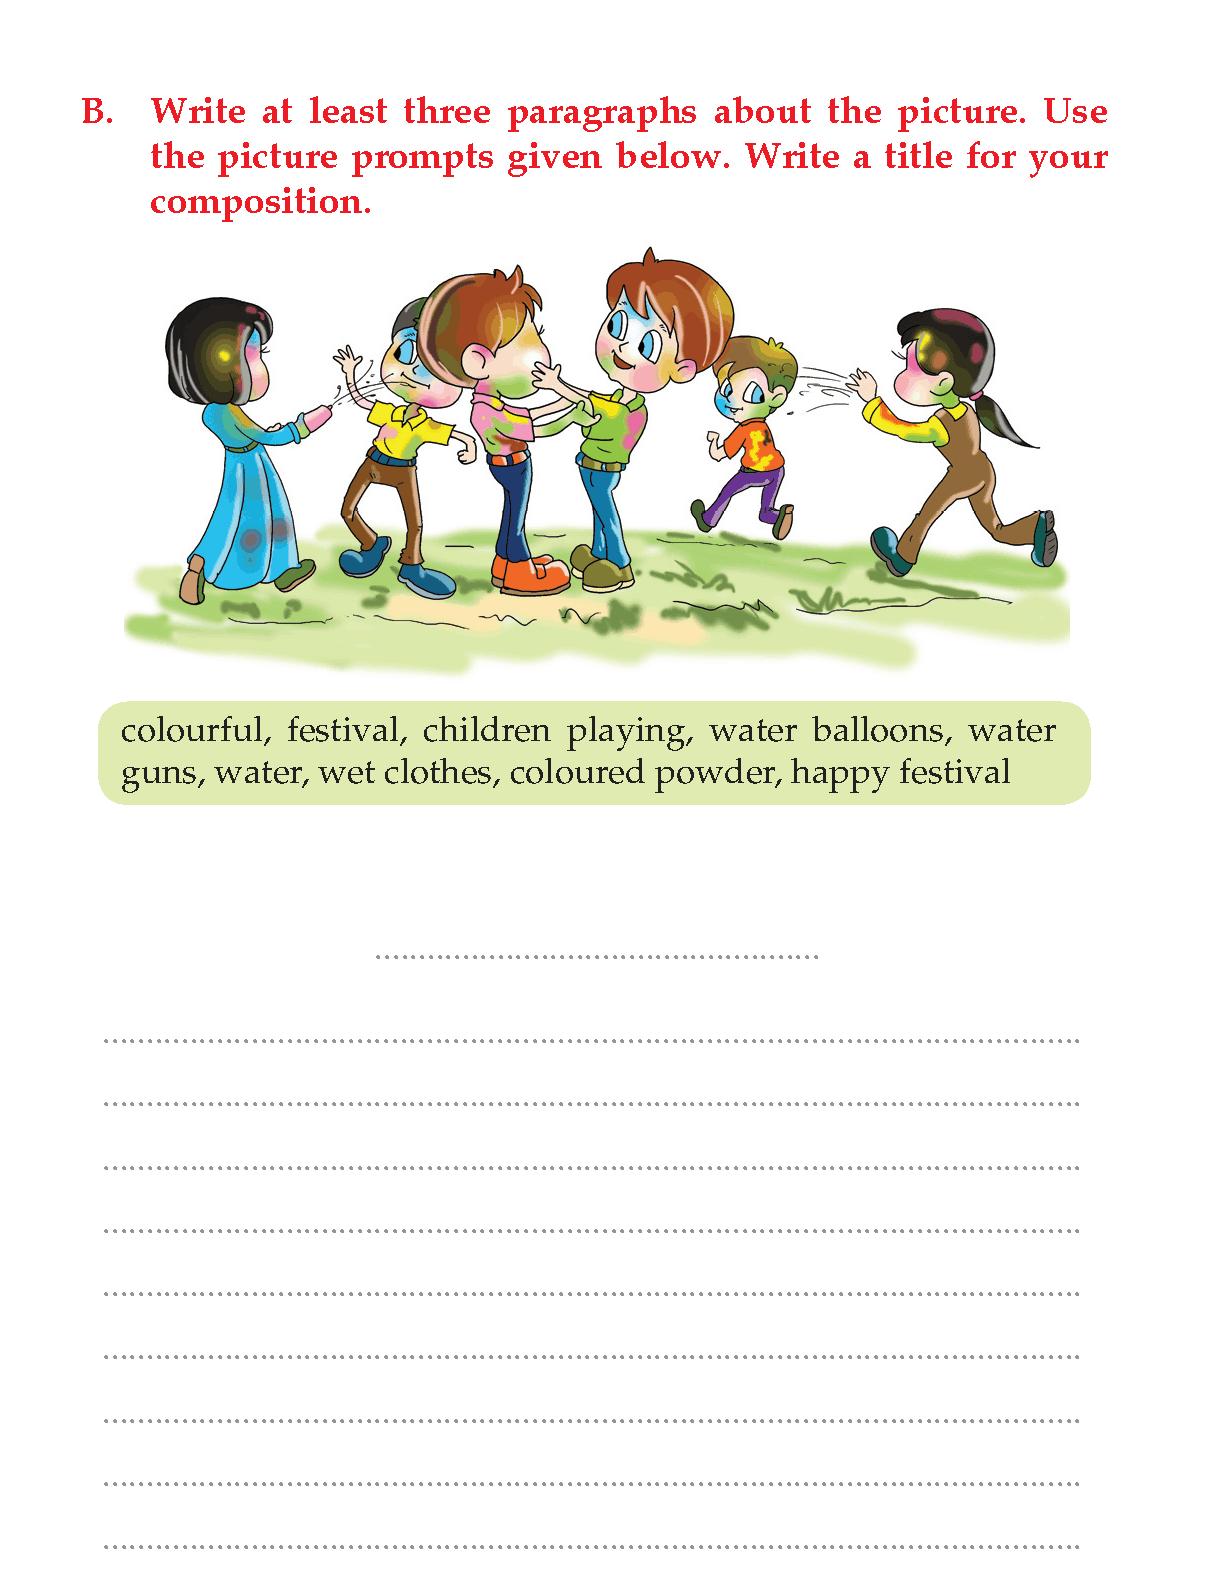 Grade 3 Picture Composition | Composition Writing Skill - Page 8